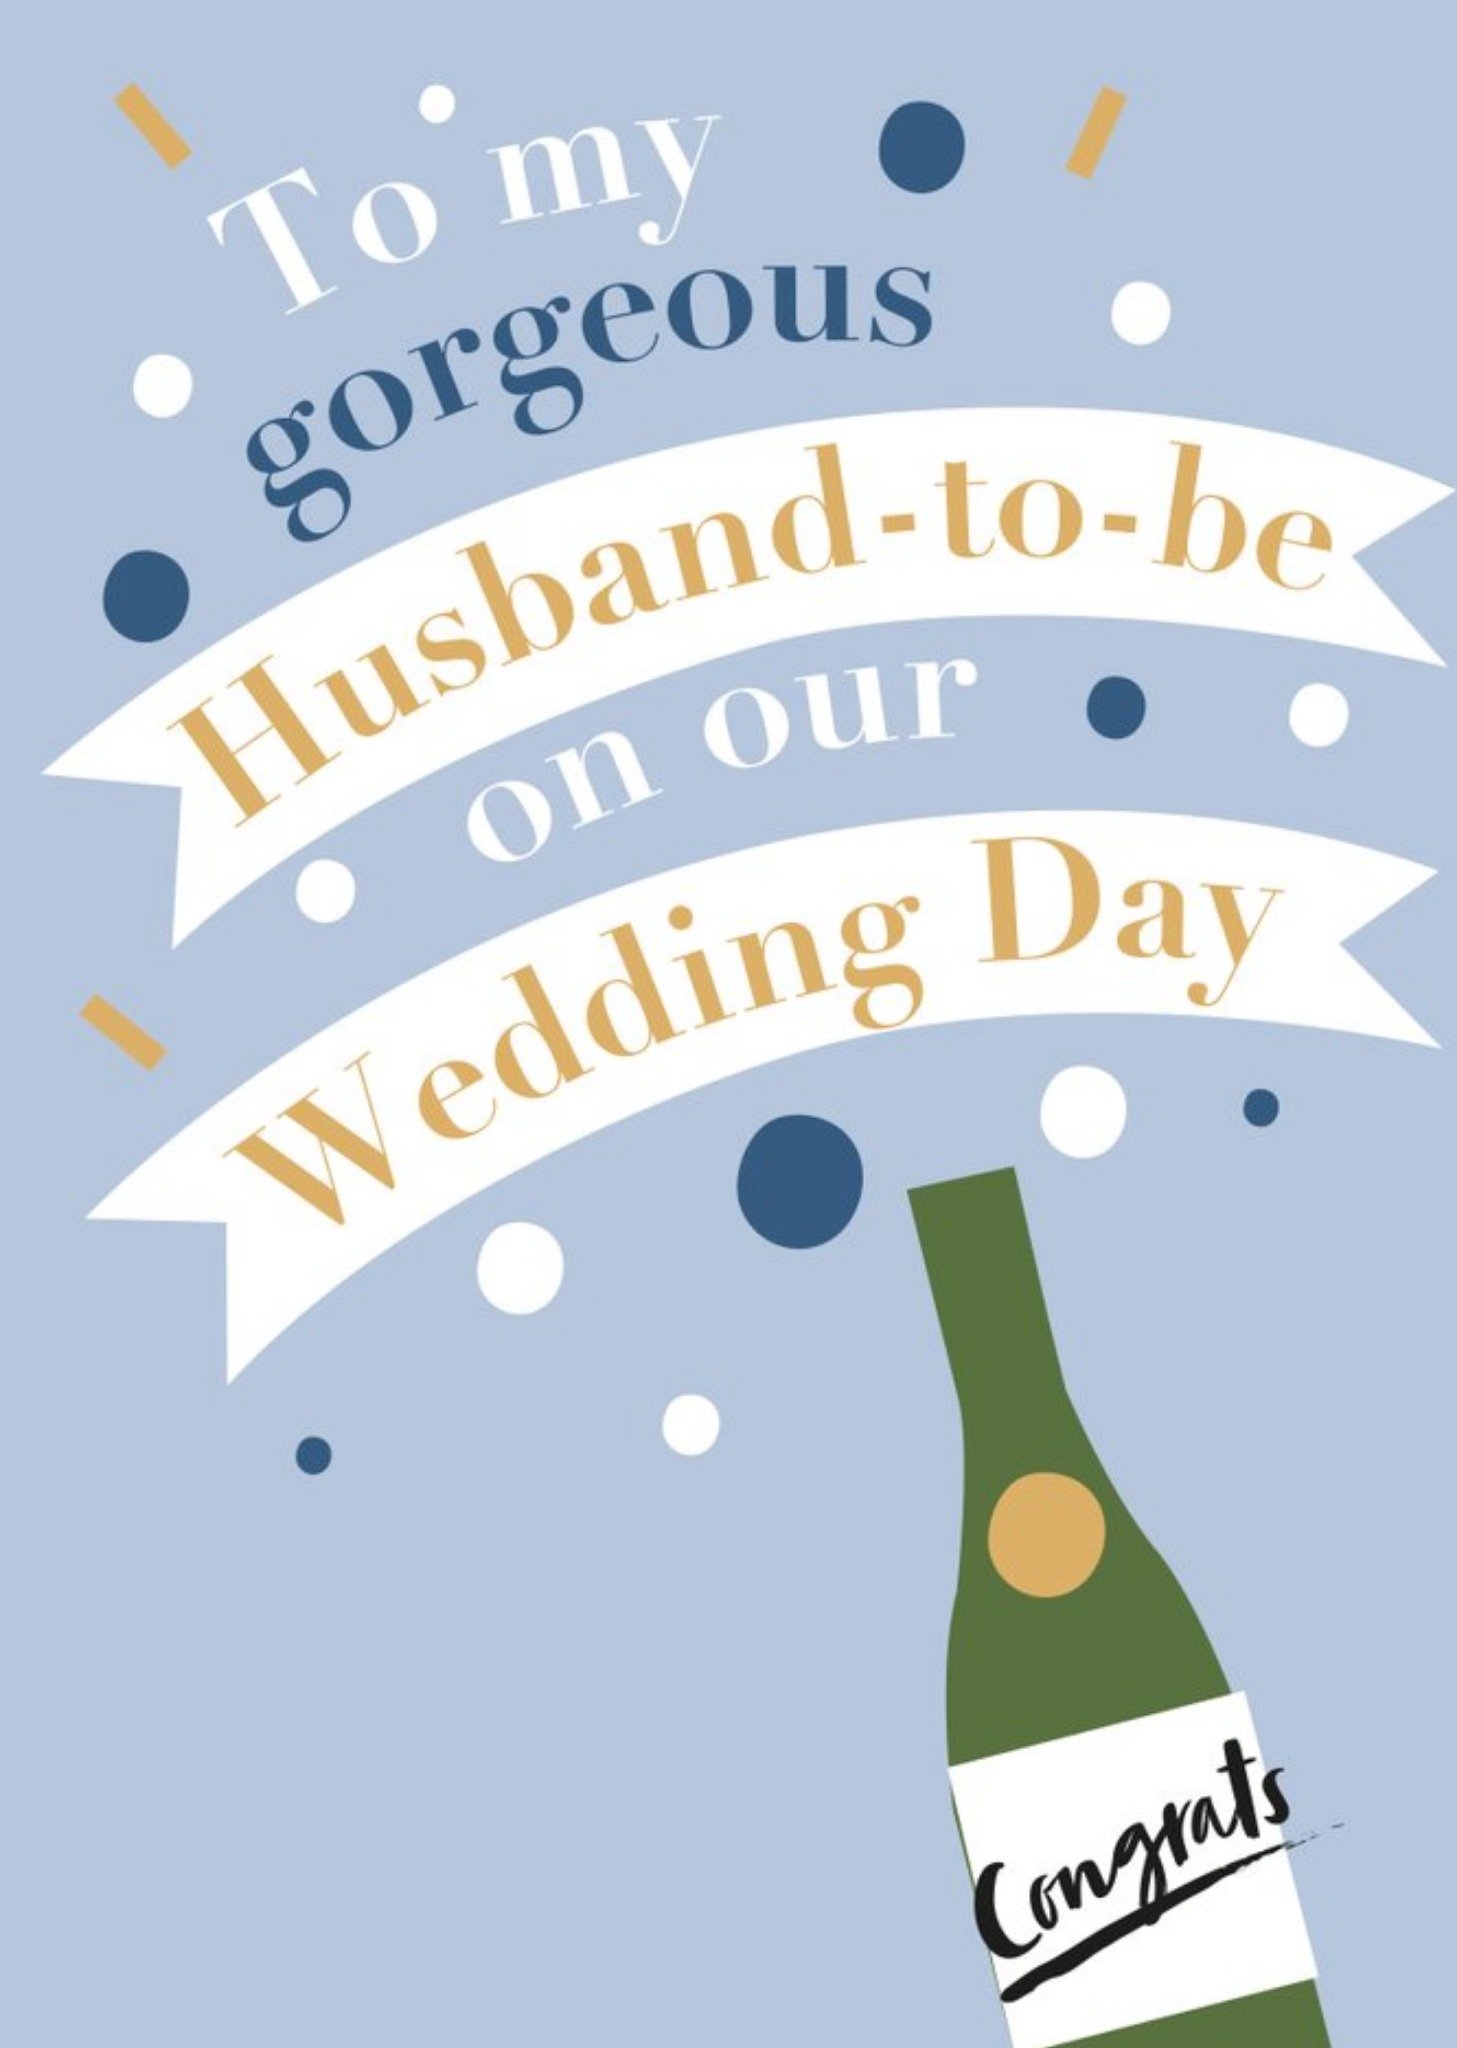 Moonpig Illustration Of A Bottle Of Wine With Banners On A Blue Background Husband To Be Wedding Day